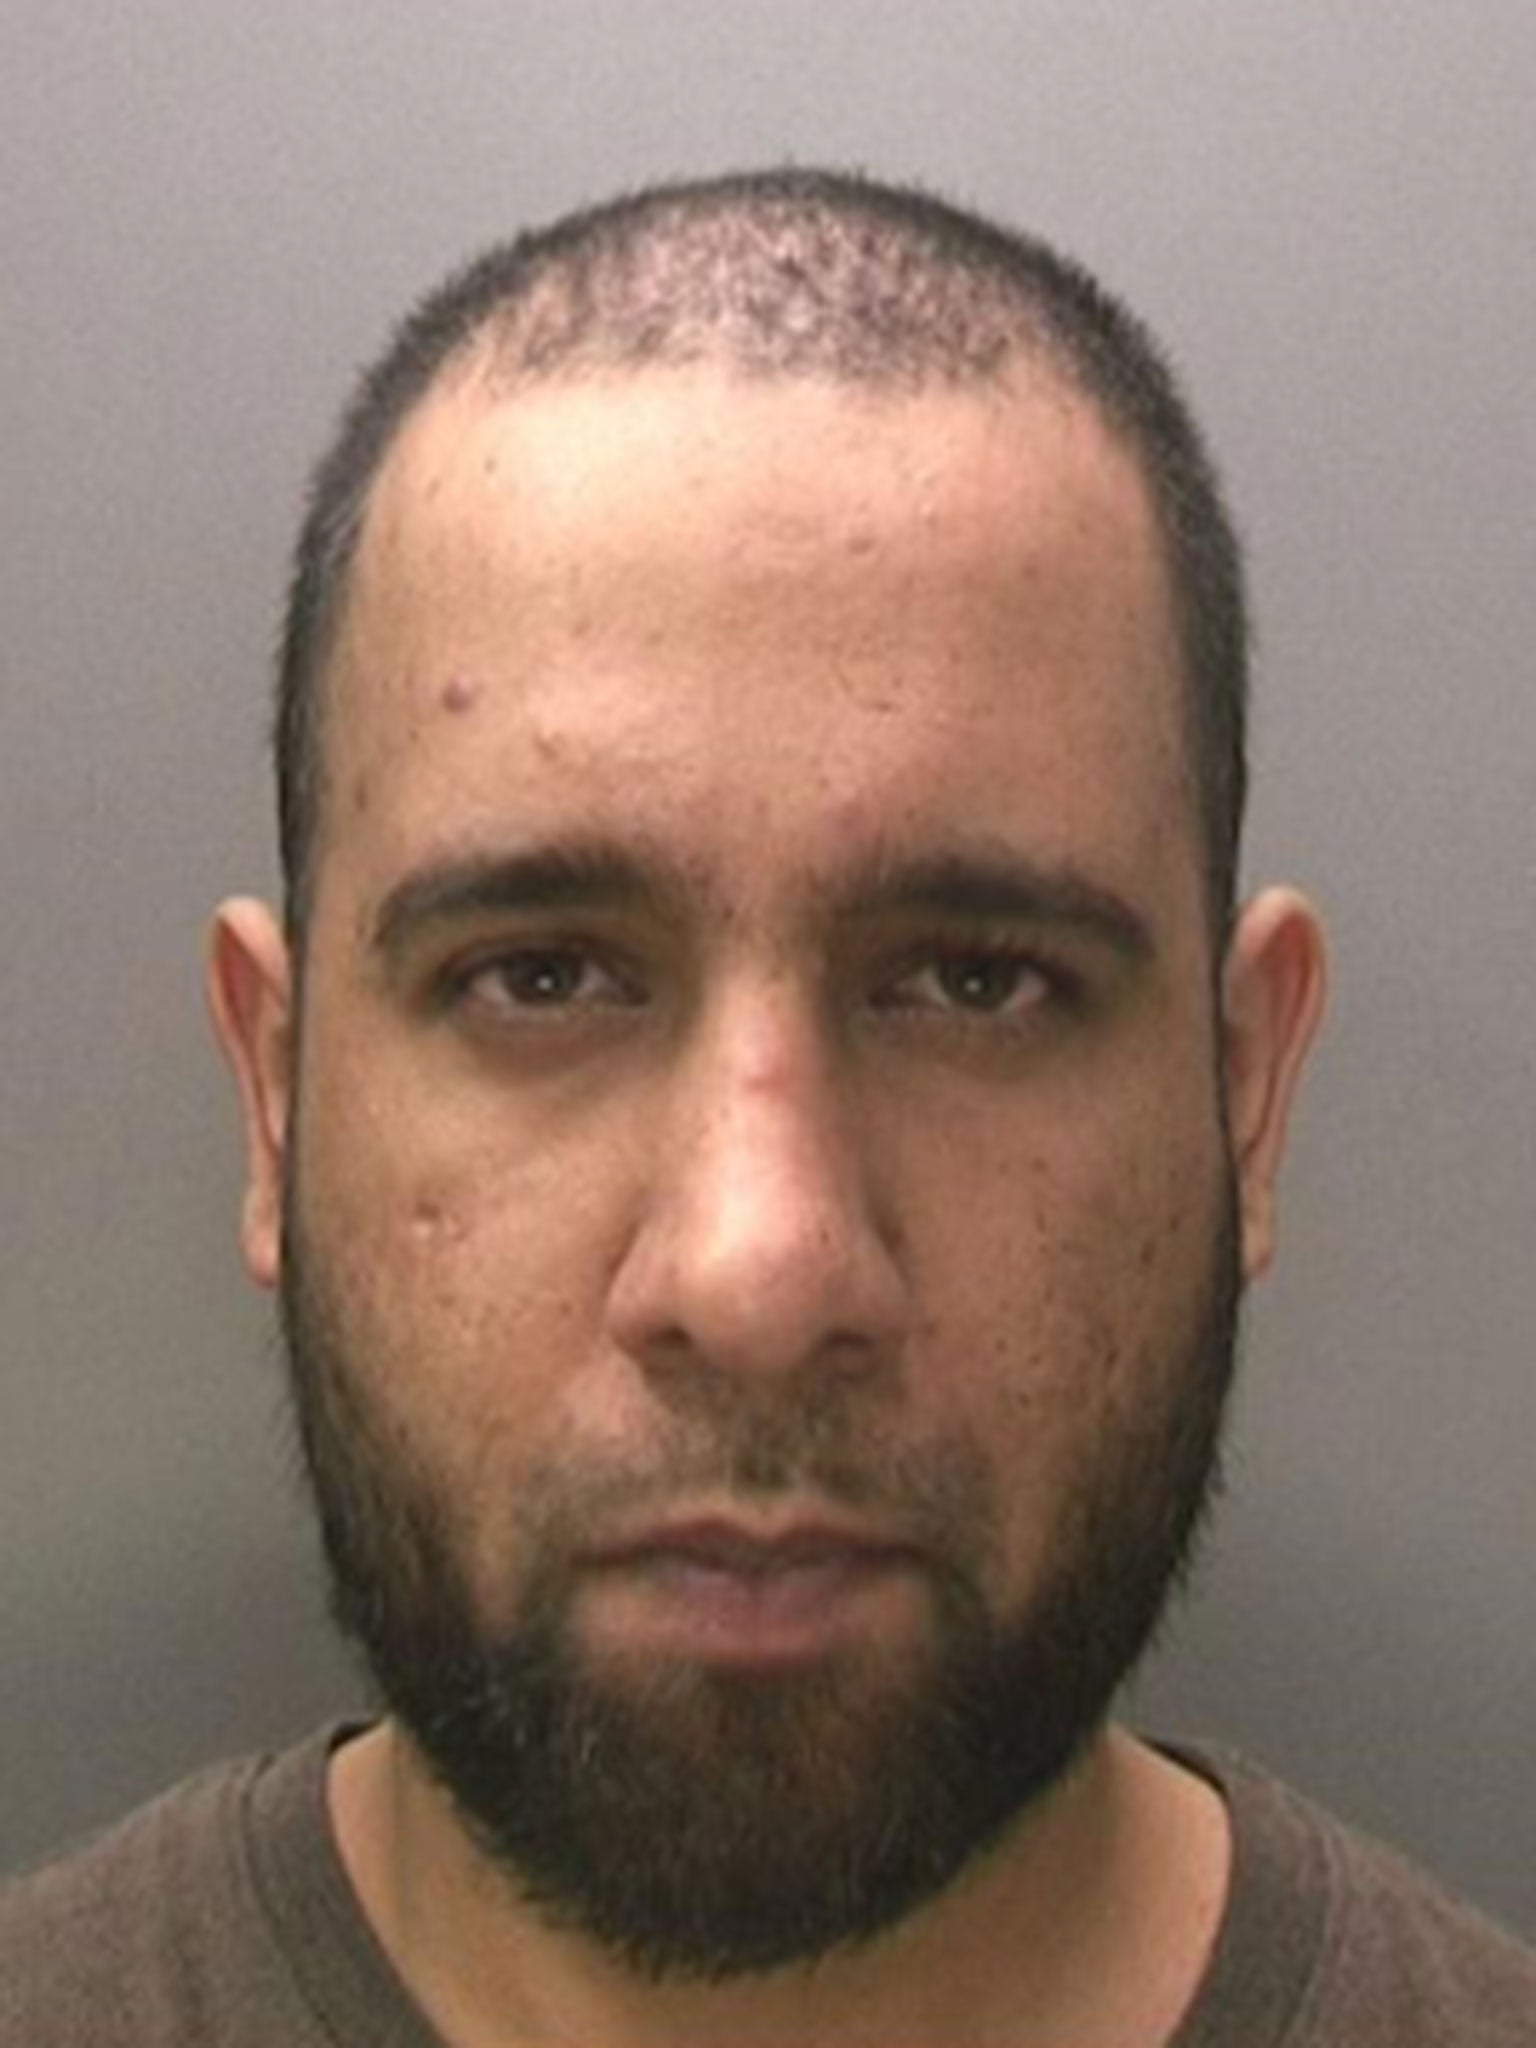 Zahid Hussain tried to make a pressure cooker bomb and improvised detonator parts from fairy lights in a bedroom in his parents' house